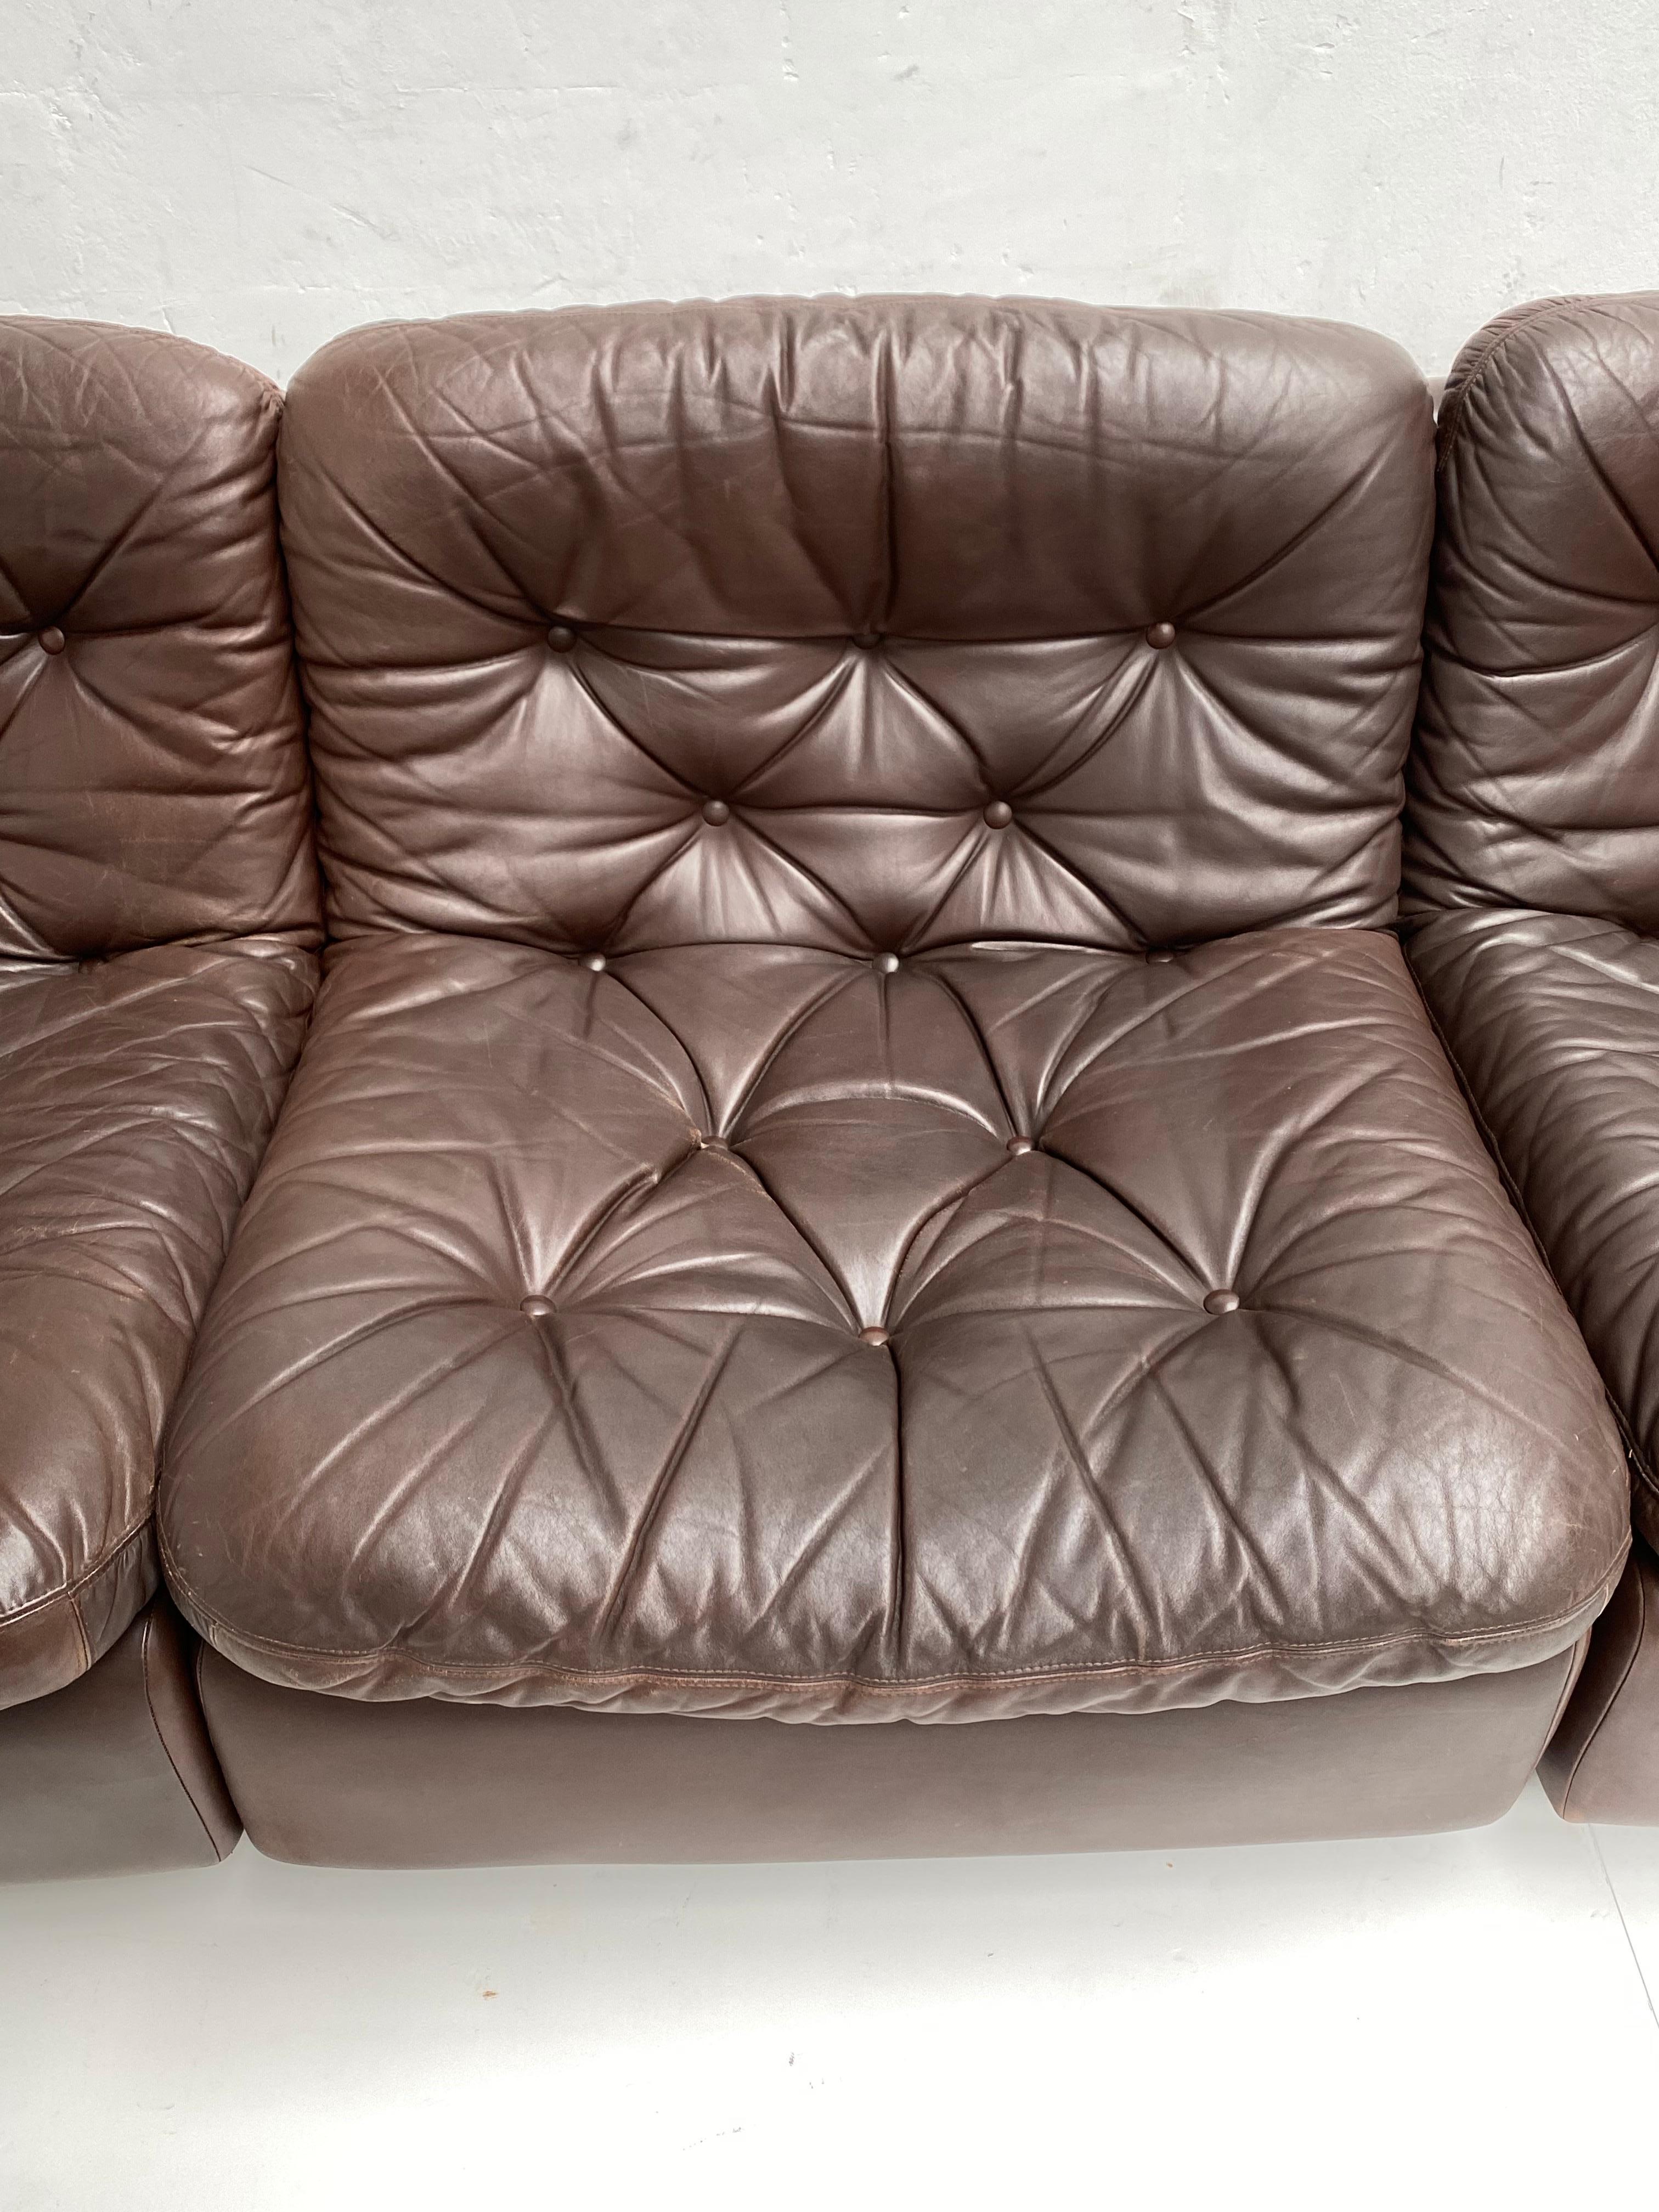 Chocolate Brown Leather 5-Piece Modular Seating System, COR Germany, 1970s 2